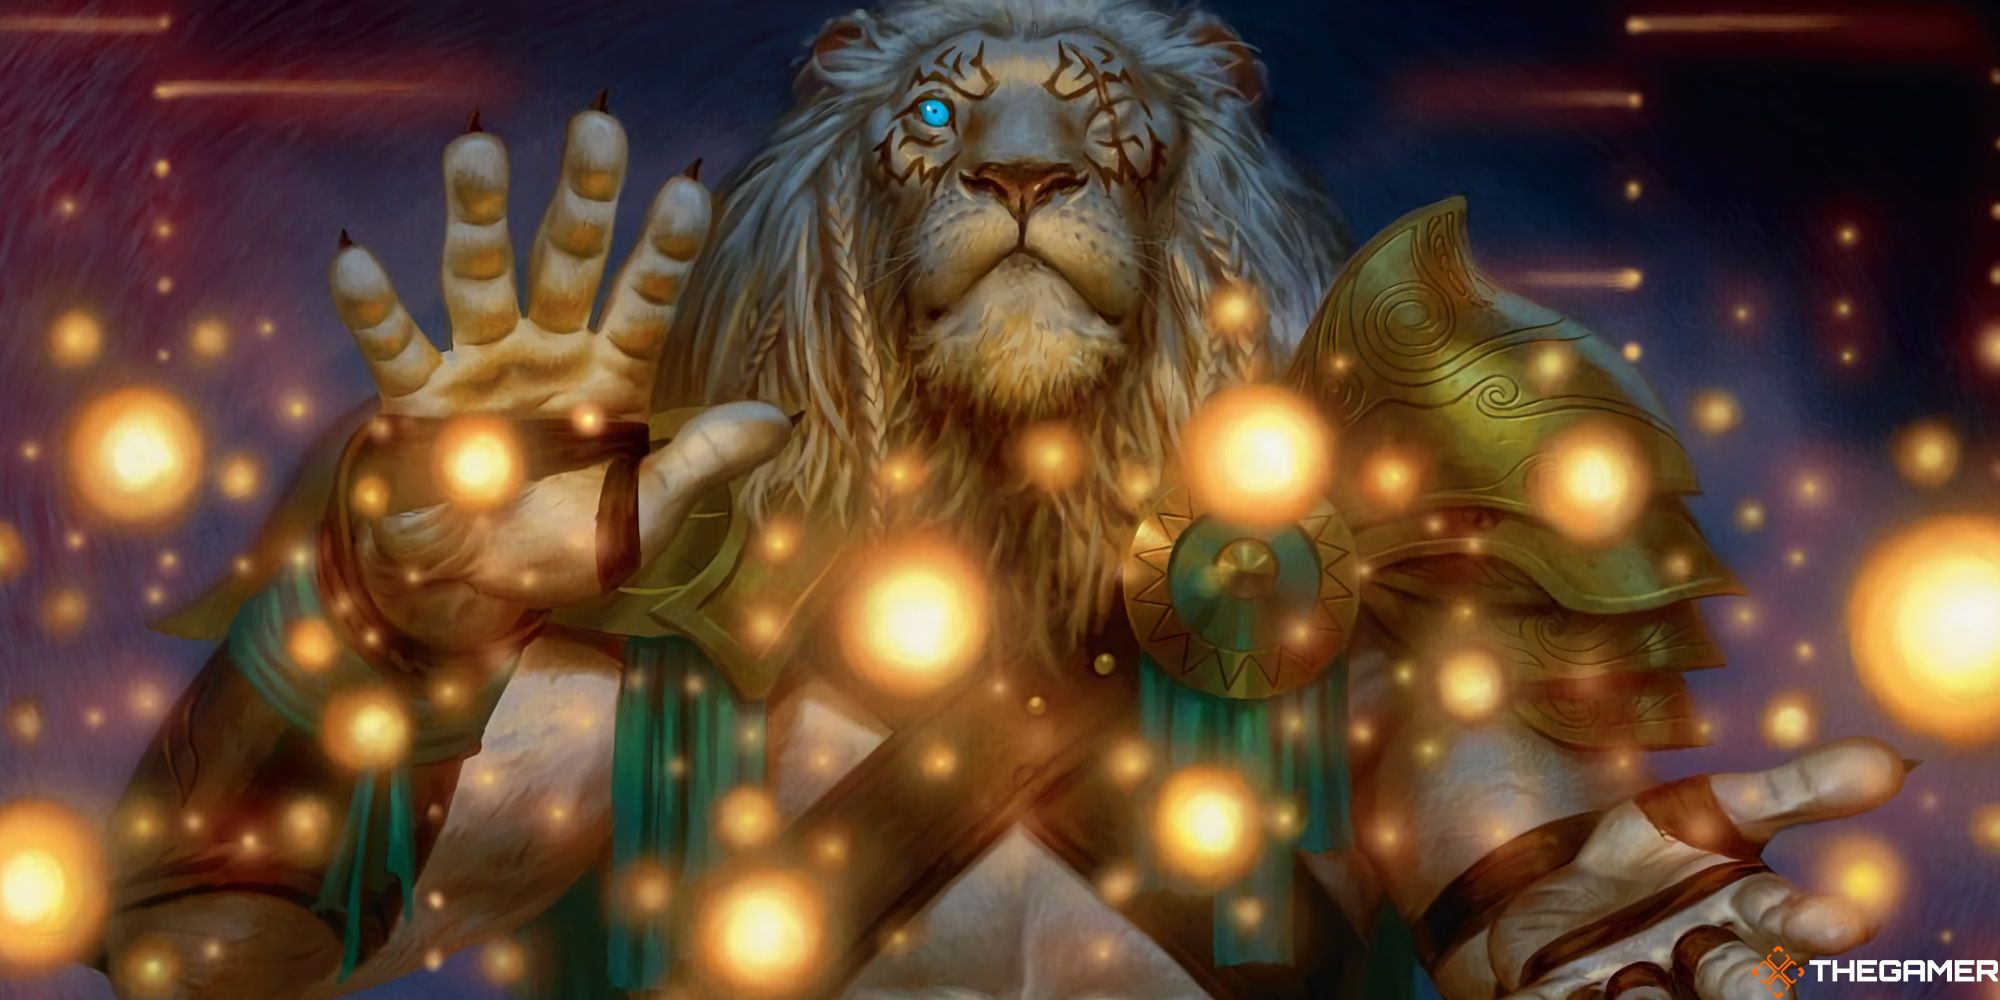 Ajani, holding his hand up in a cloud of balls of light.